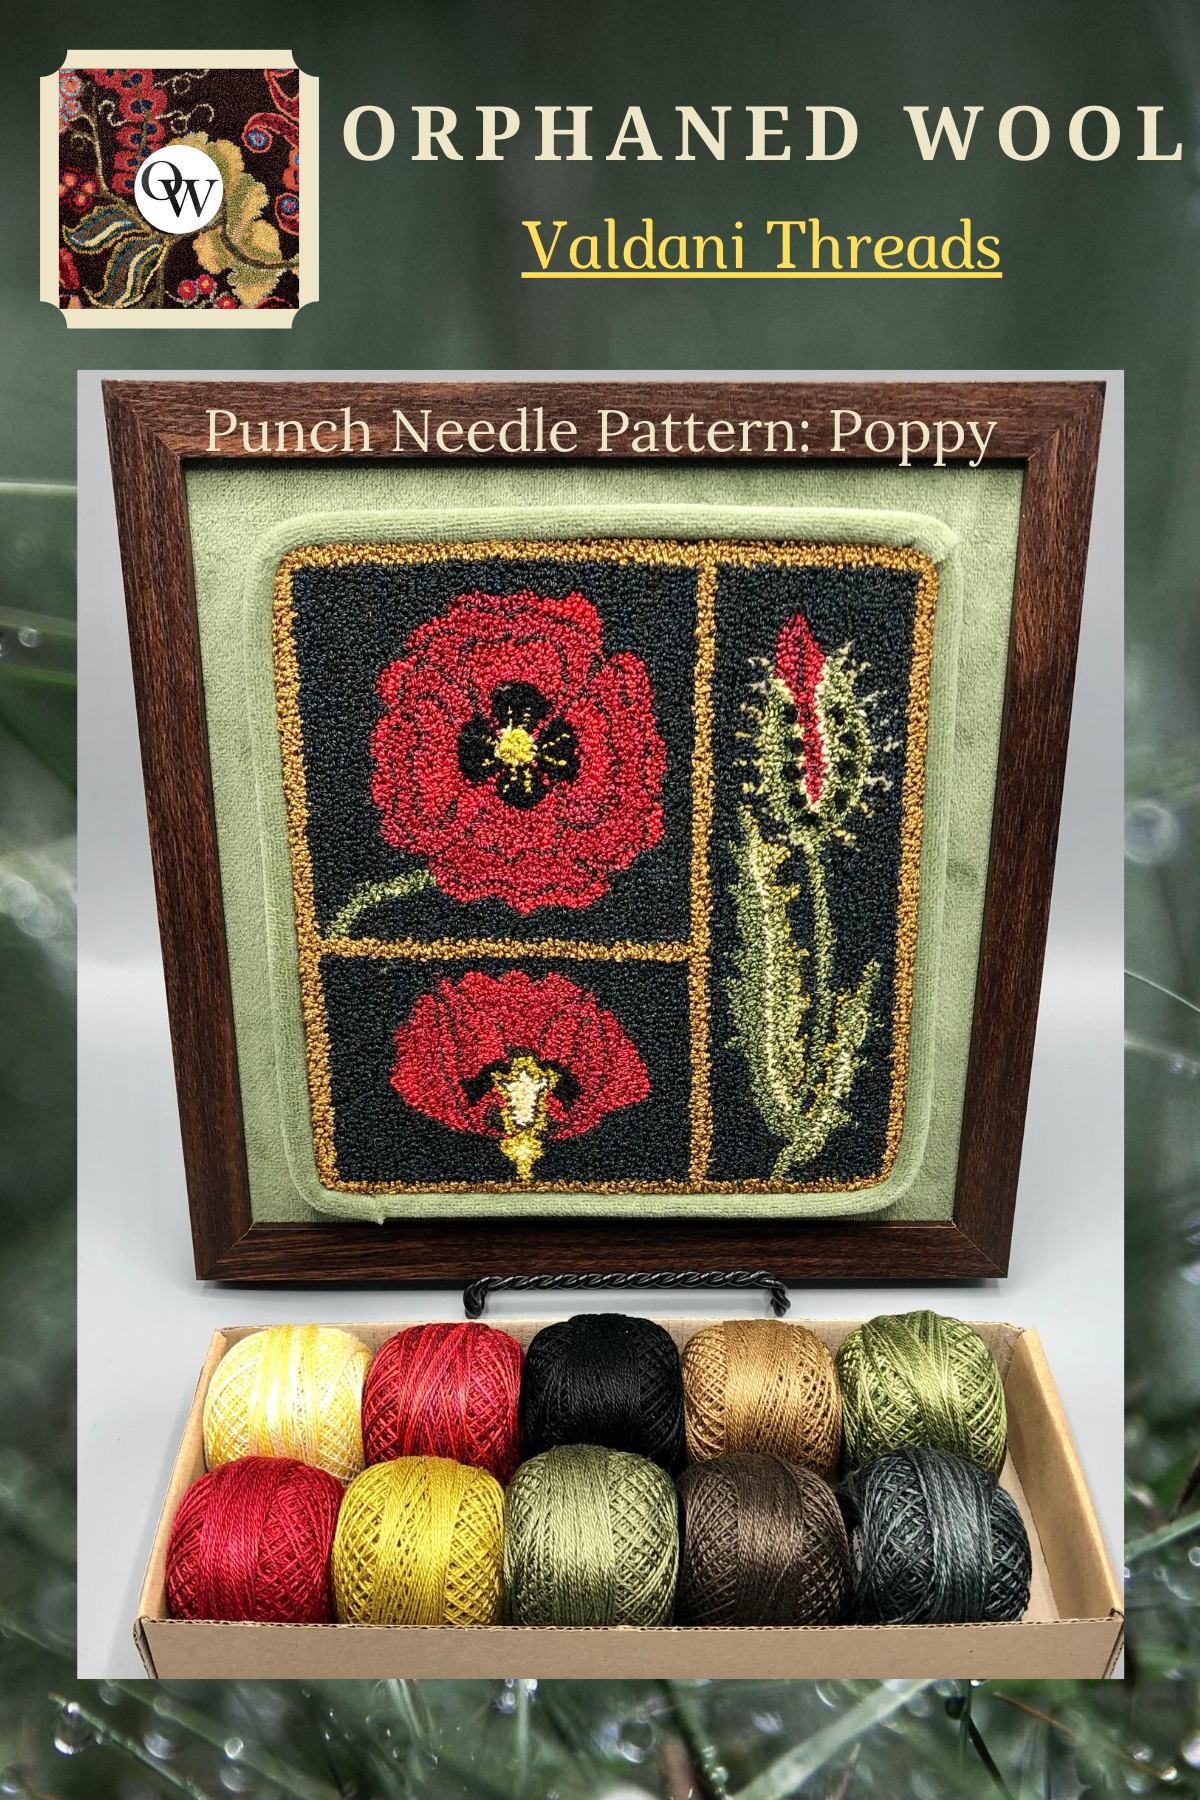 Poppy- Punch Needle Pattern by Orphaned Wool. Pattern is available as a paper pattern or pattern on weaver's cloth fabric. This design also has a companion design (Marigold-sold separately ).